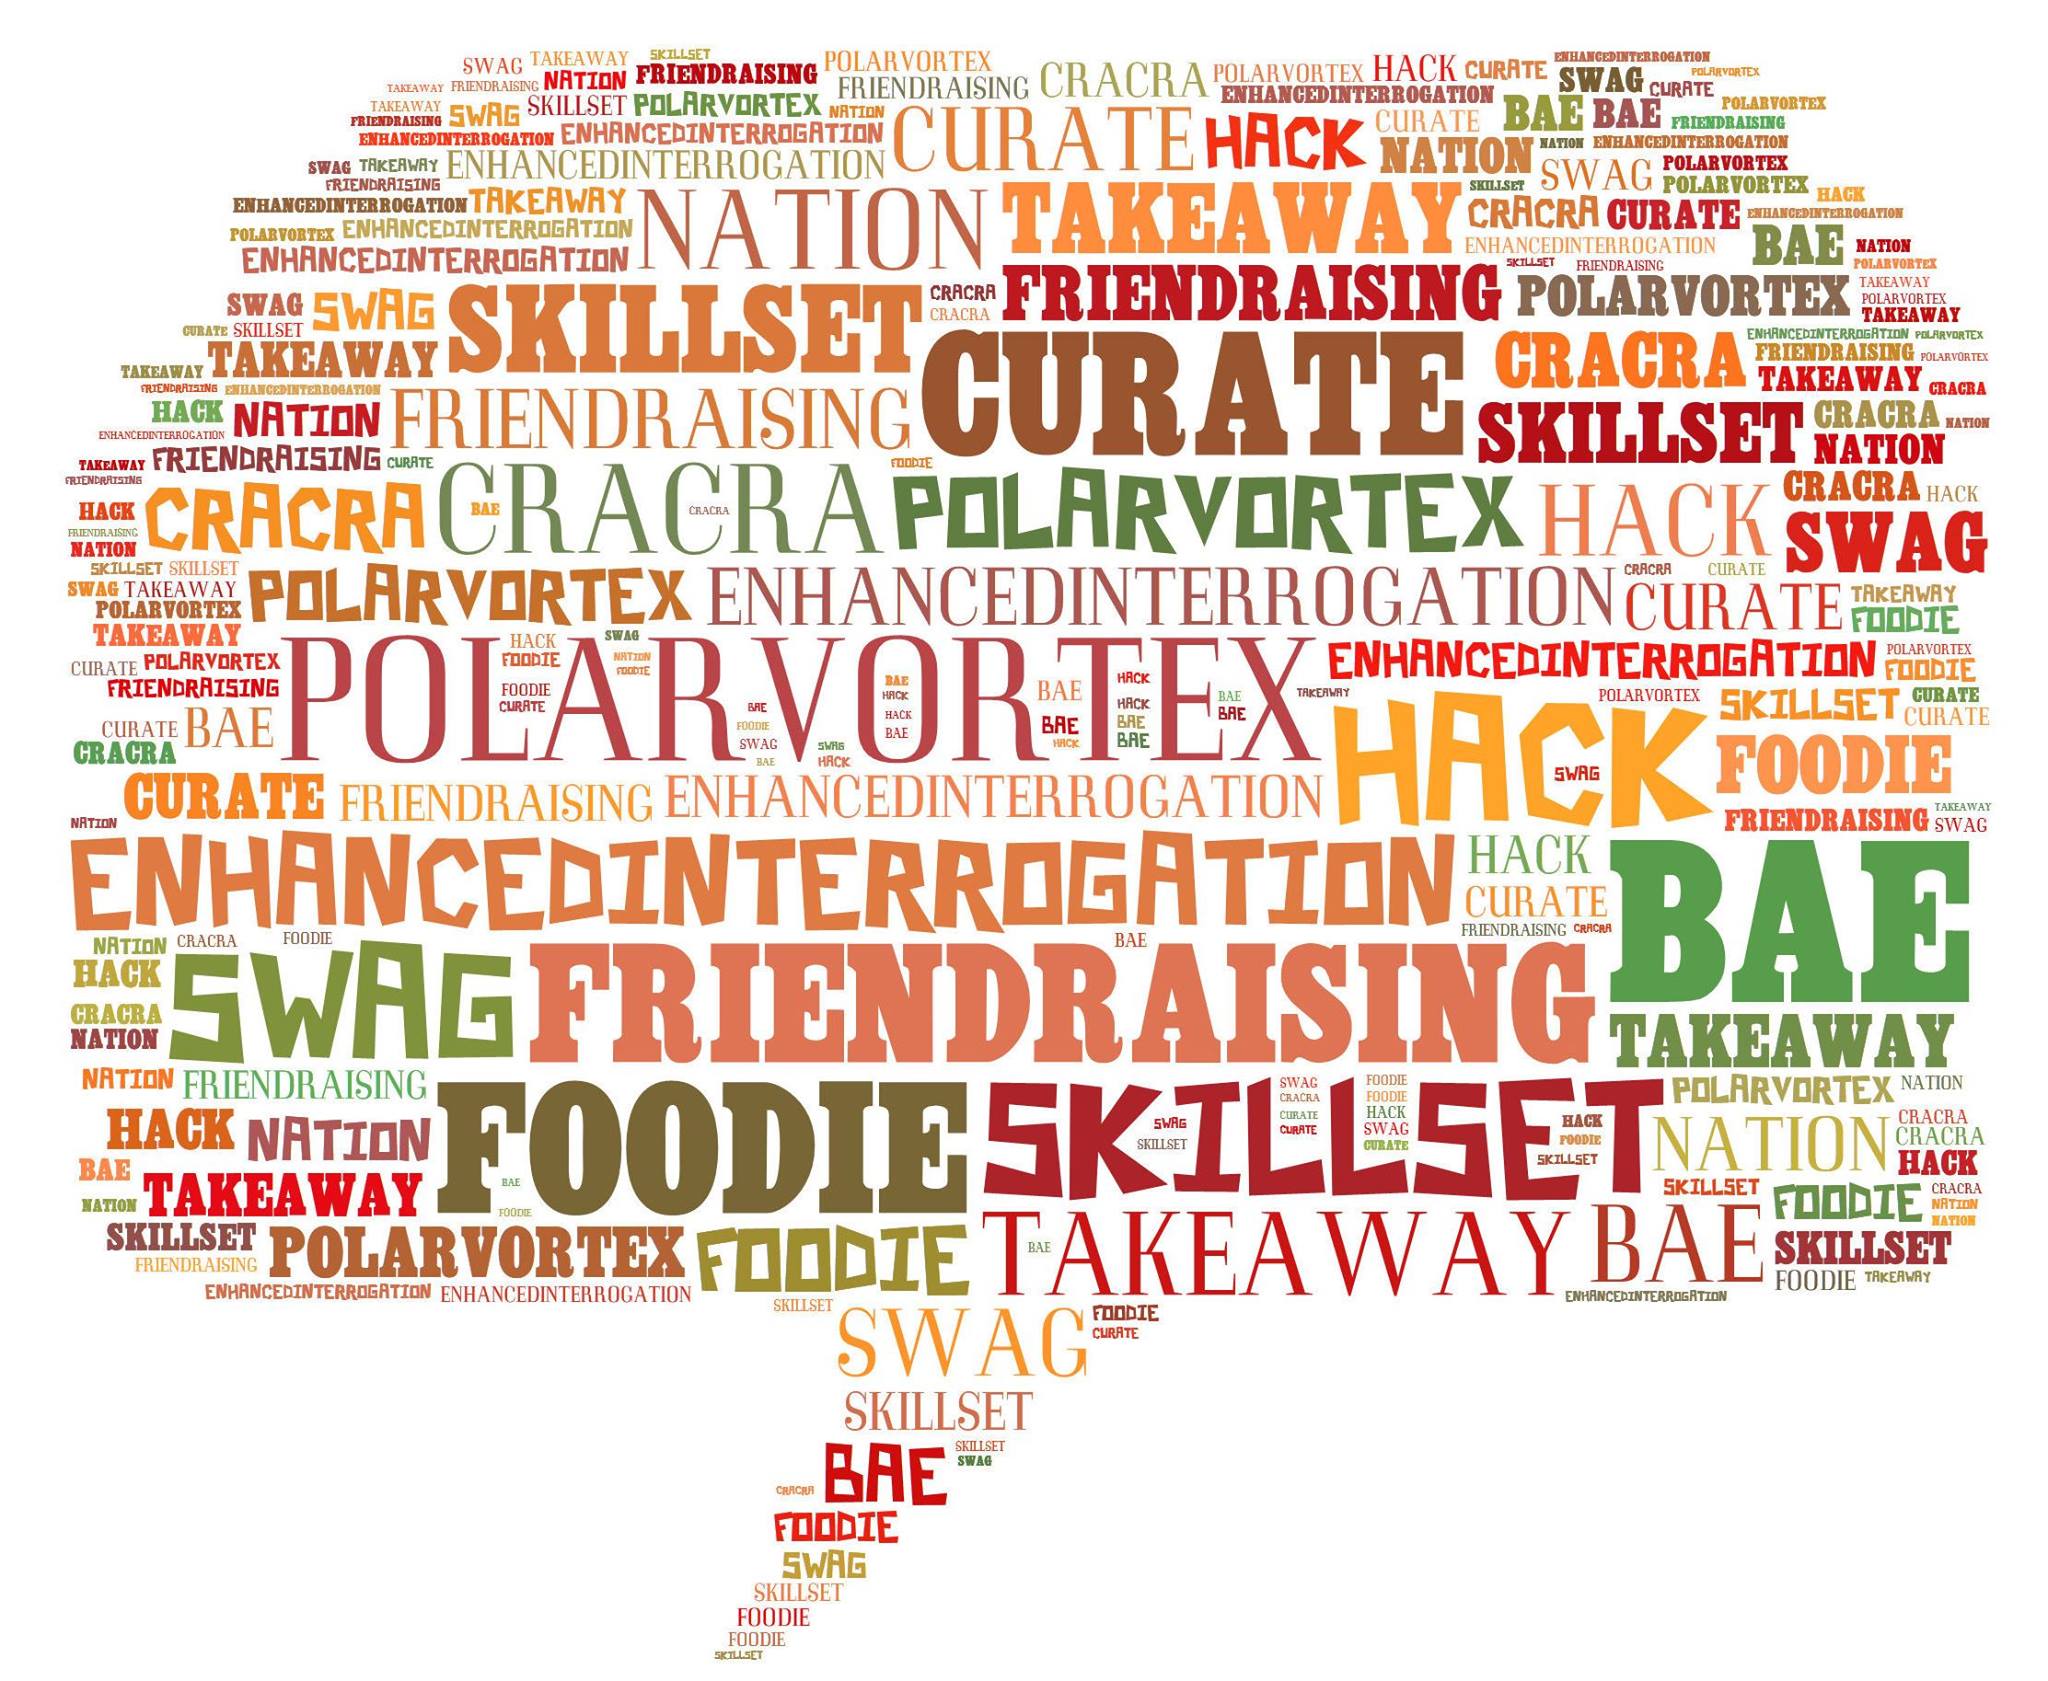 Word cloud including trendy terms such as "curate," "hack," "takeaway," "skill set," "polar vortex," "enhanced interrogation," "friendraising," "foodie" and "swag."